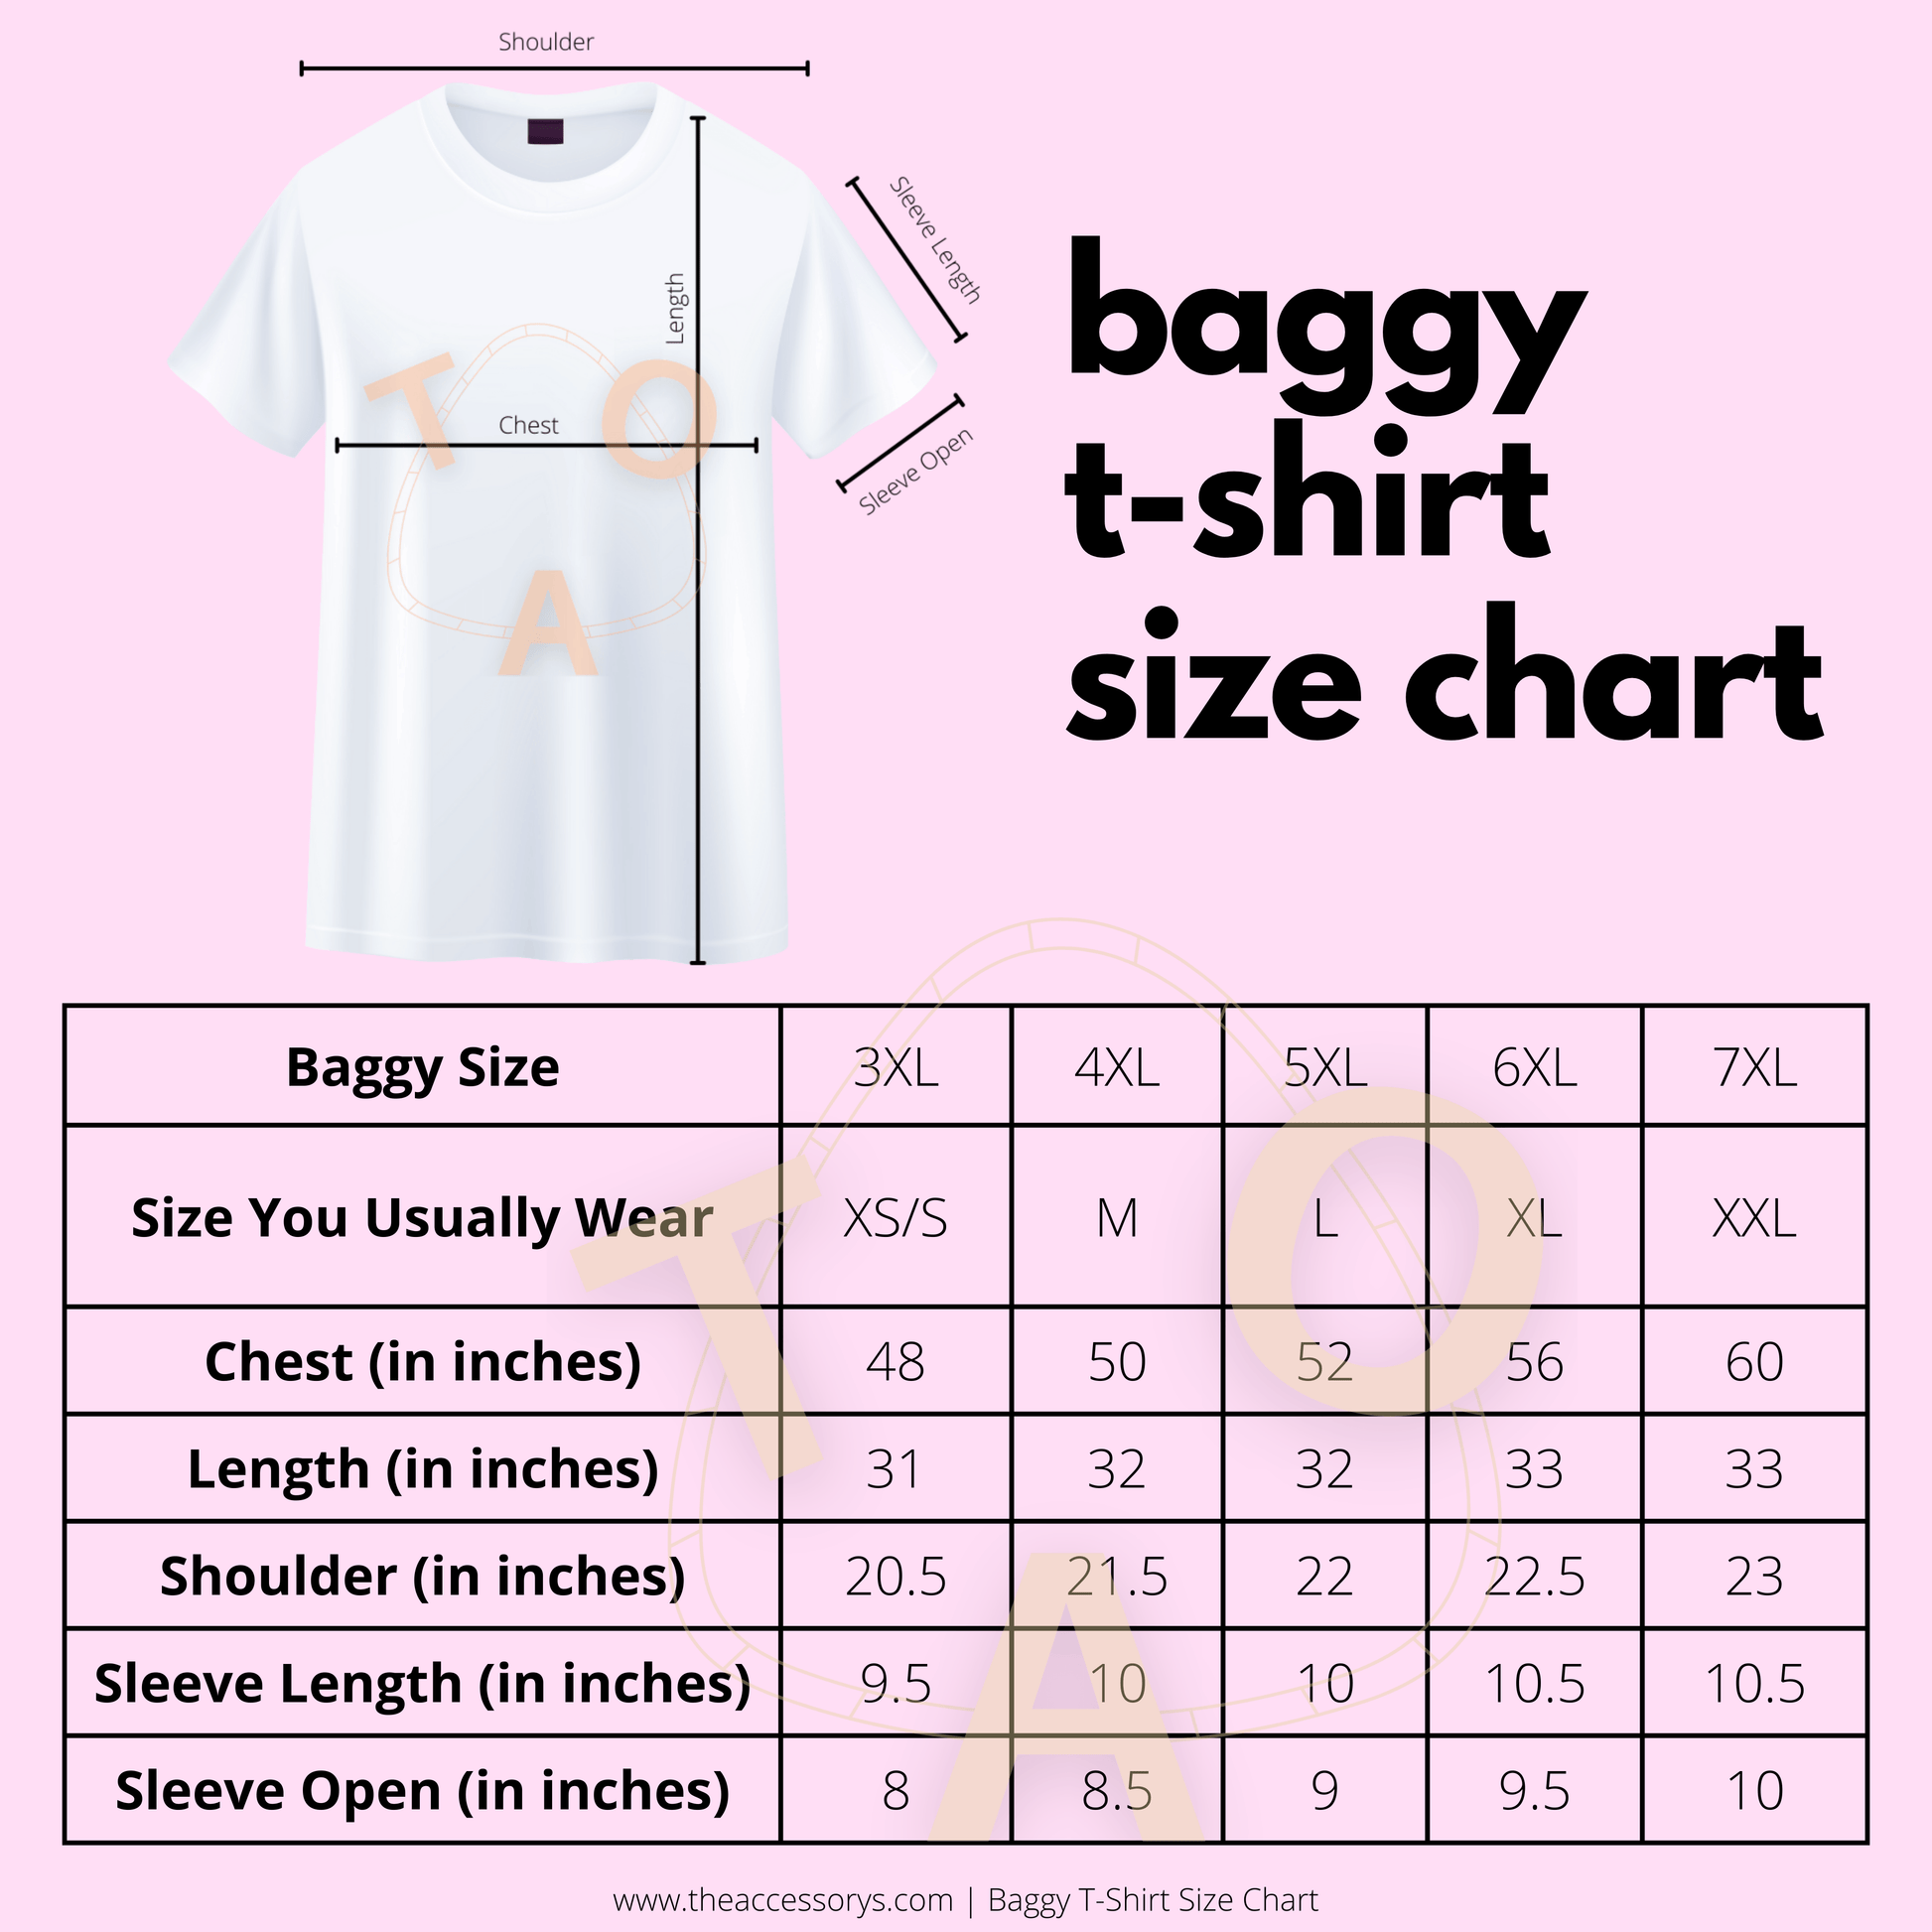 Enigma Baggy T-Shirt - The Accessorys Official